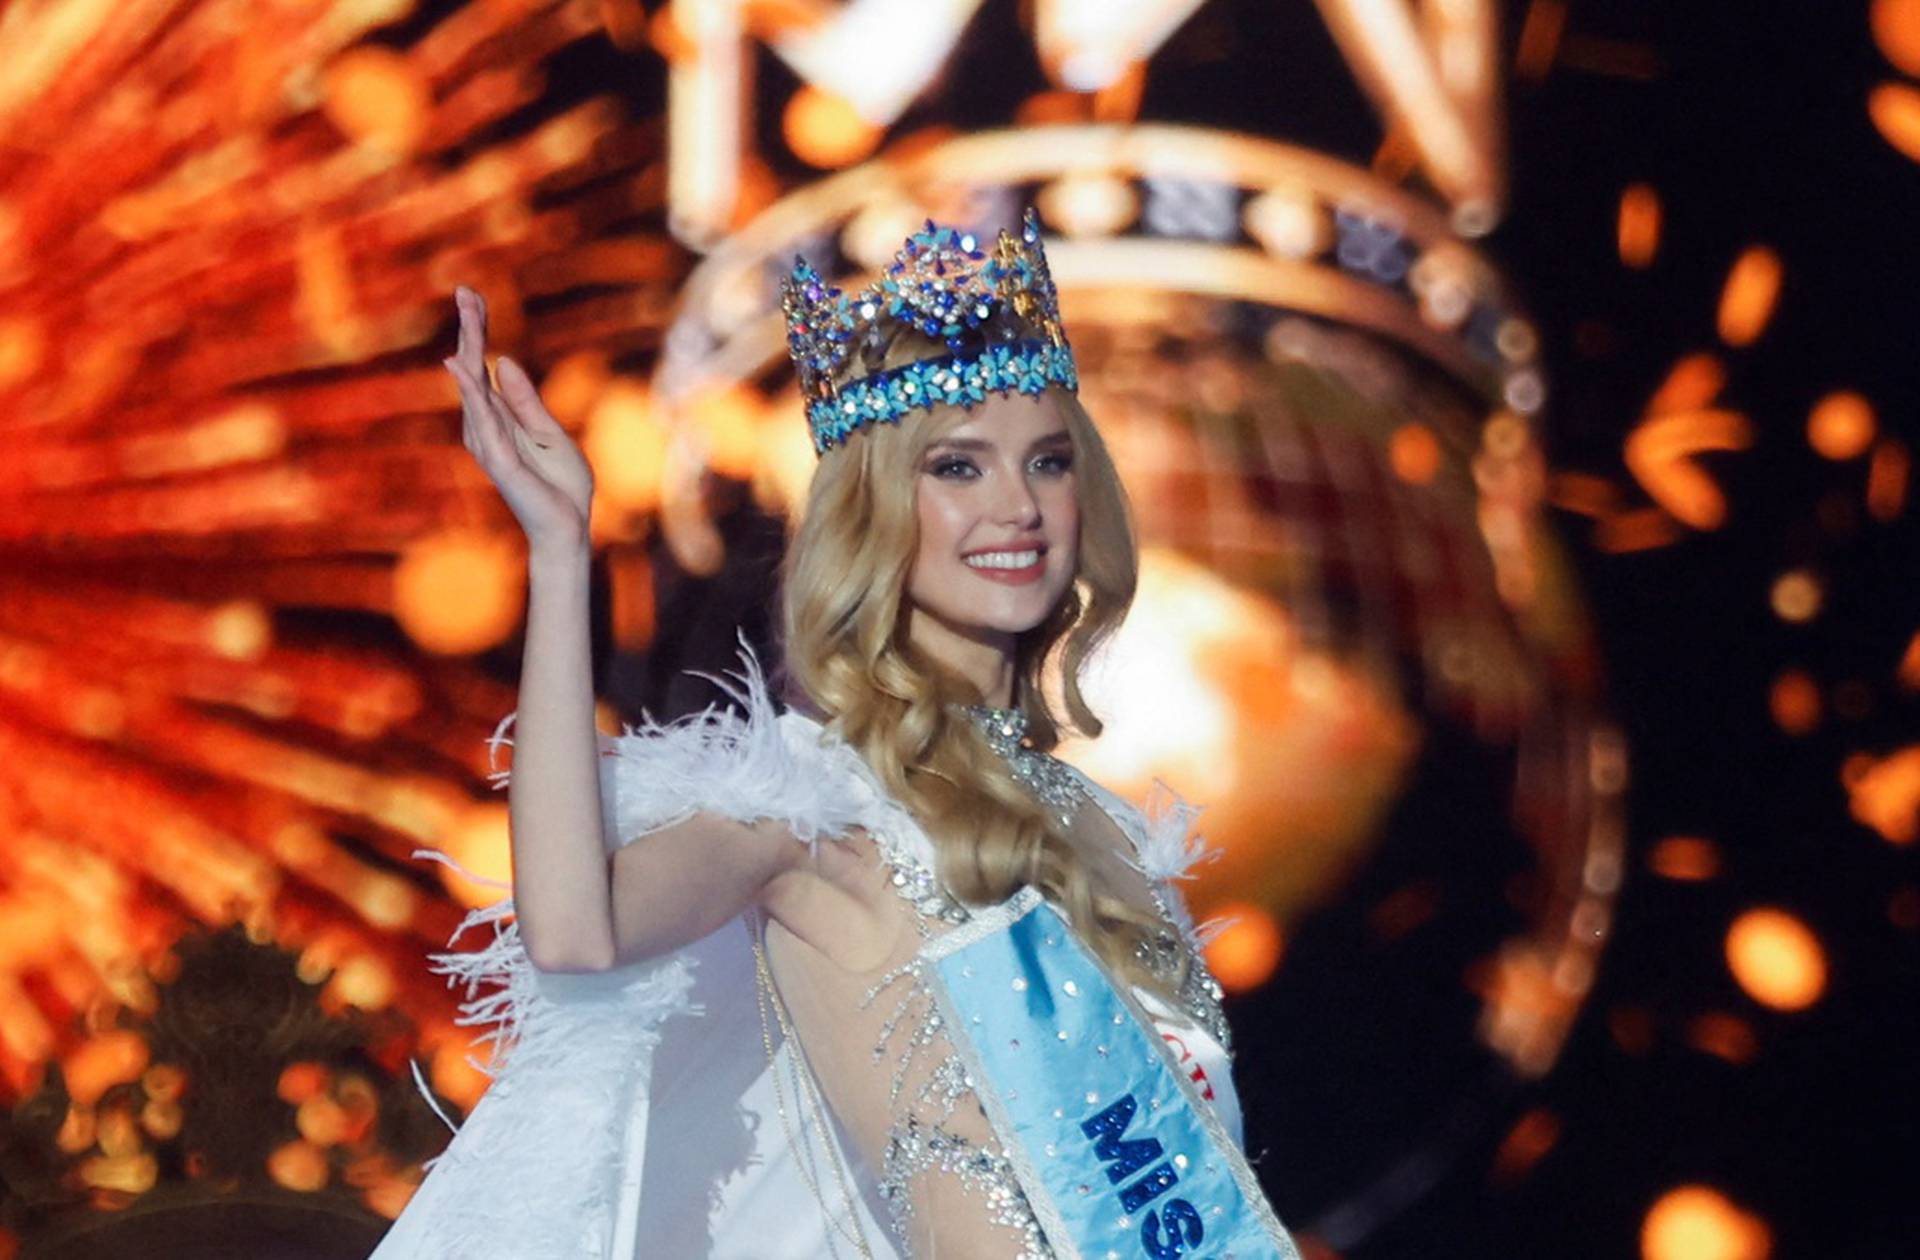 Czech Republic's Krystyna Pyszkova waves after being crowned Miss World at the 71st Miss World finale in Mumbai